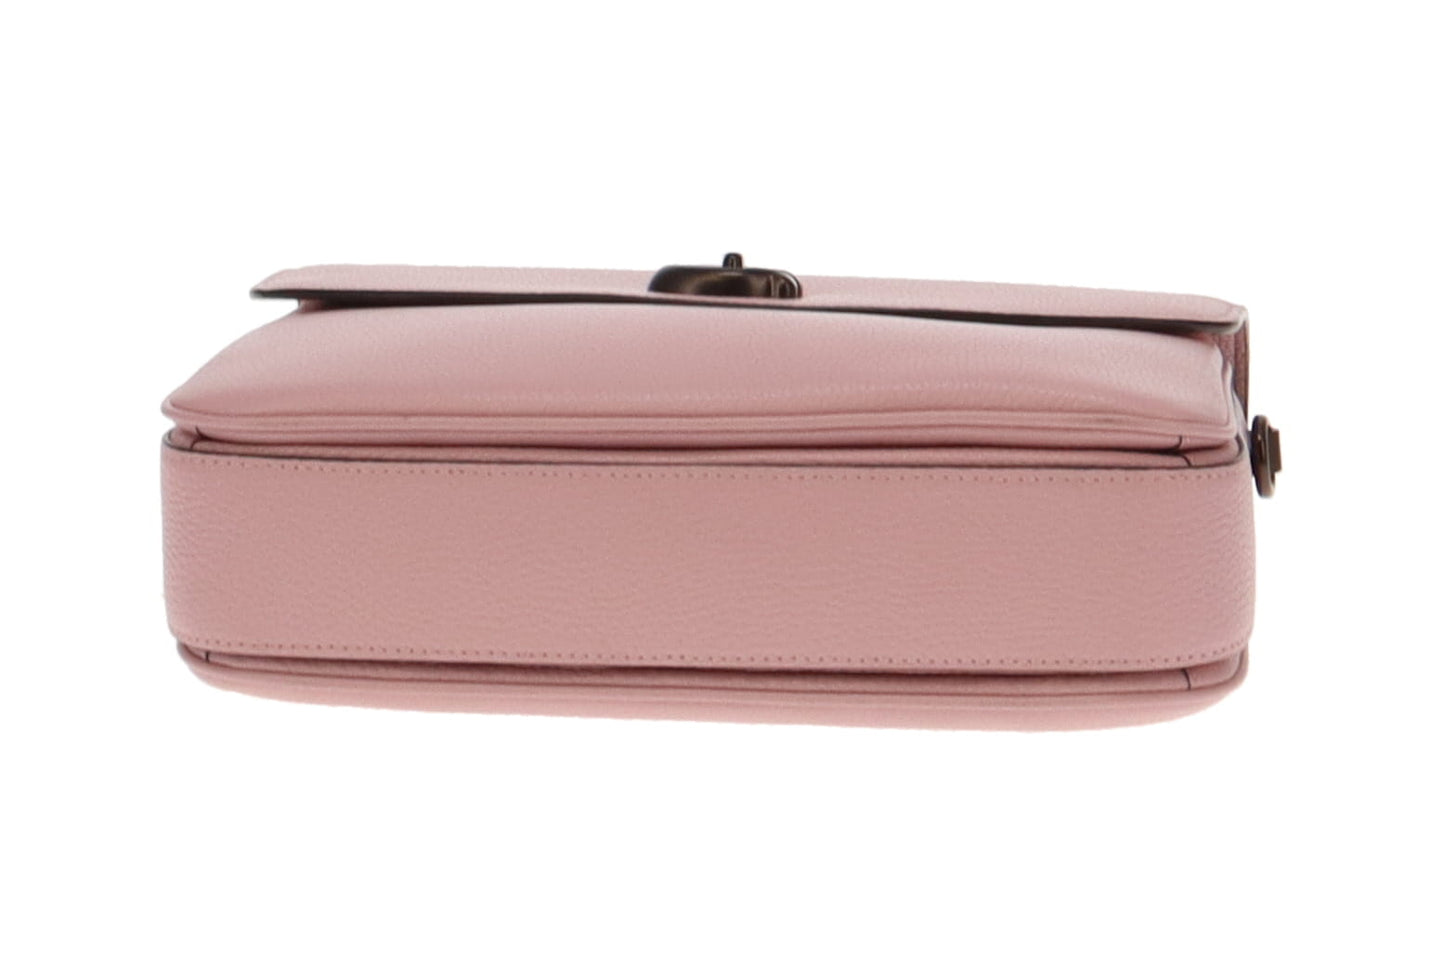 Coach Pale Pink Grained Leather Cassie Crossbody